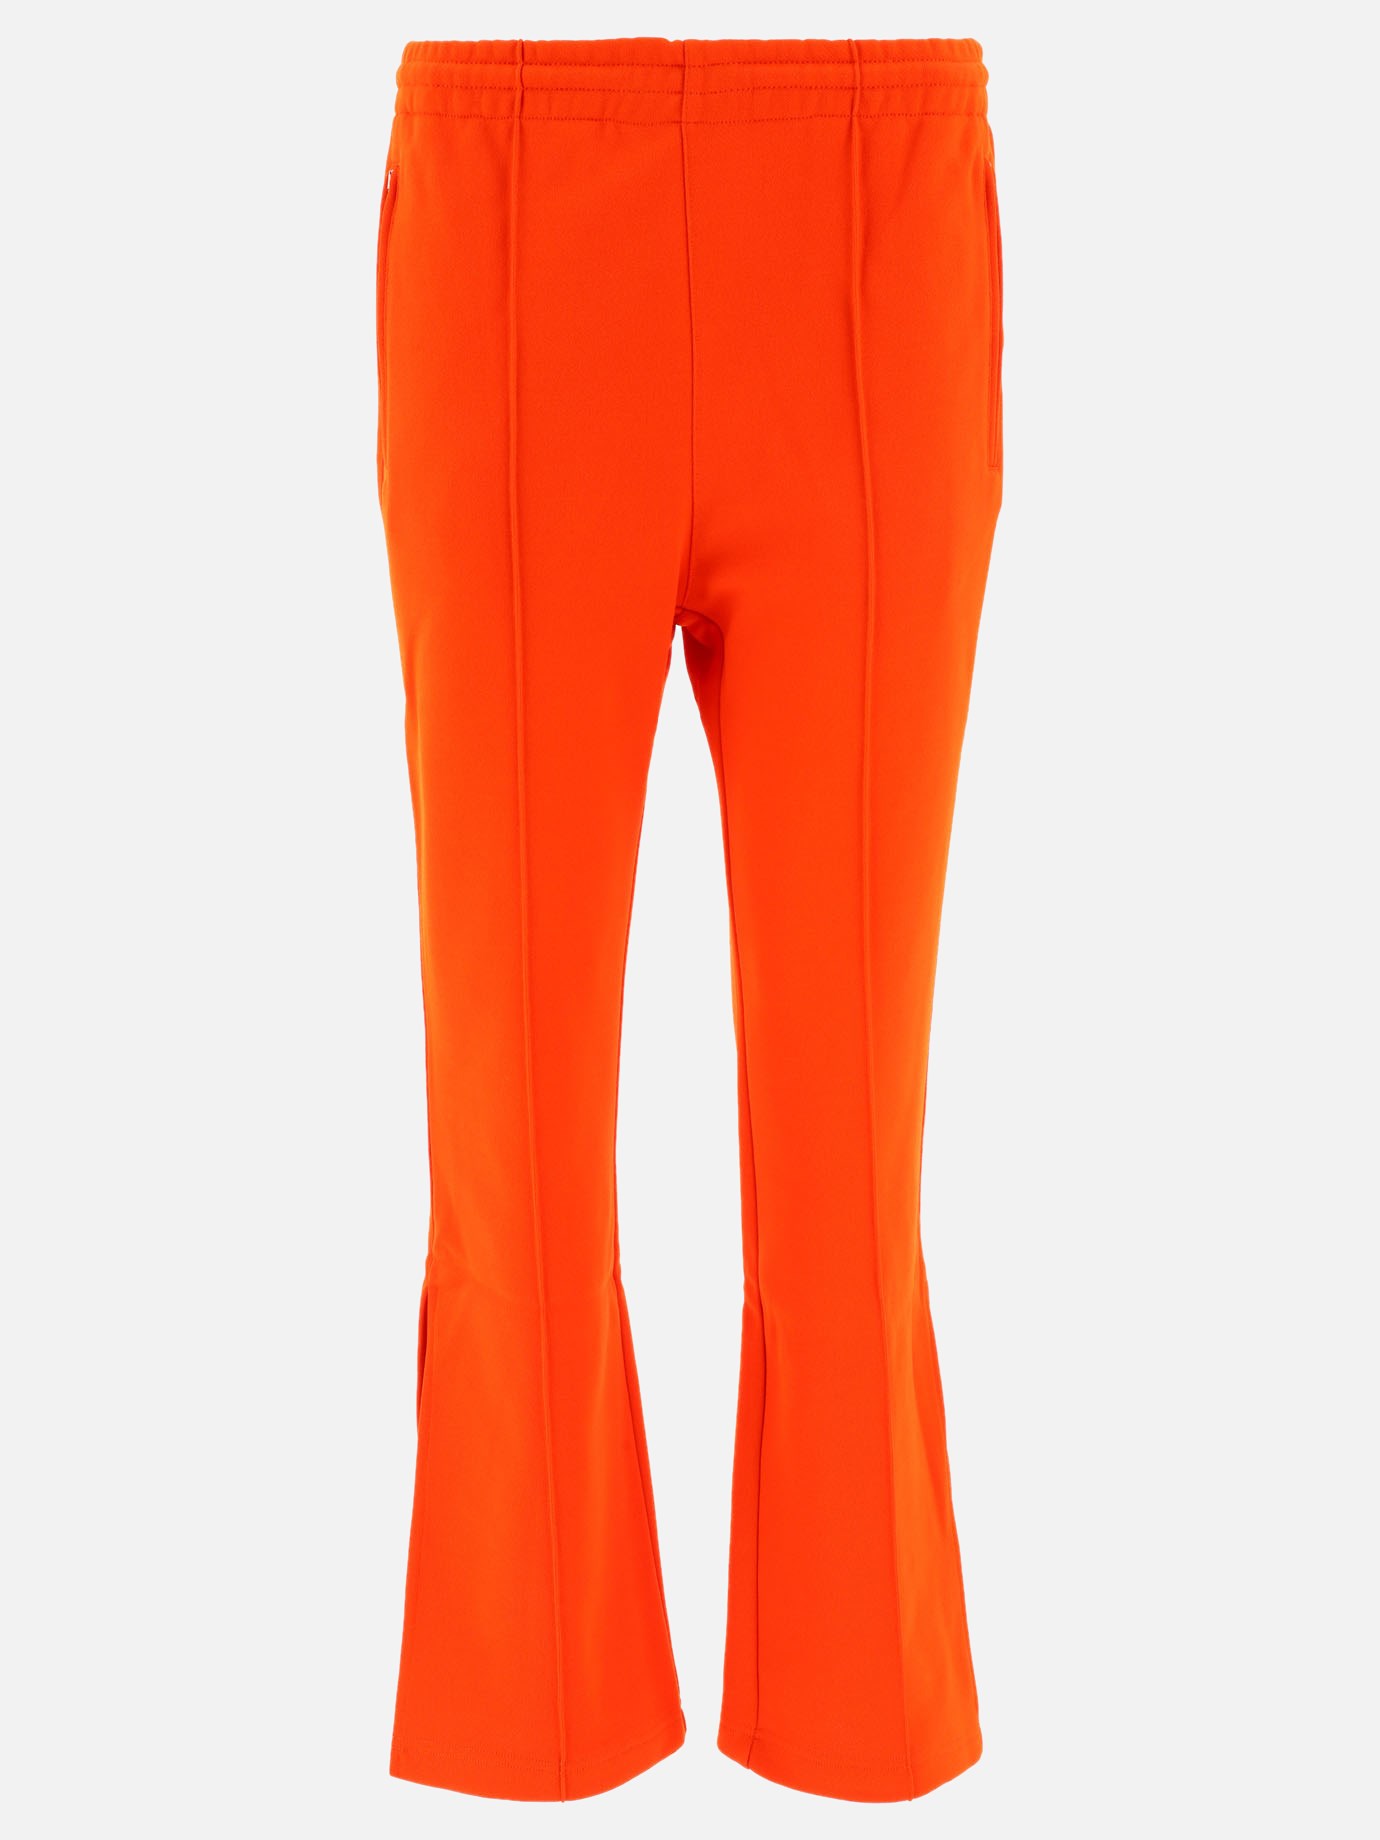 Trousers with split ends